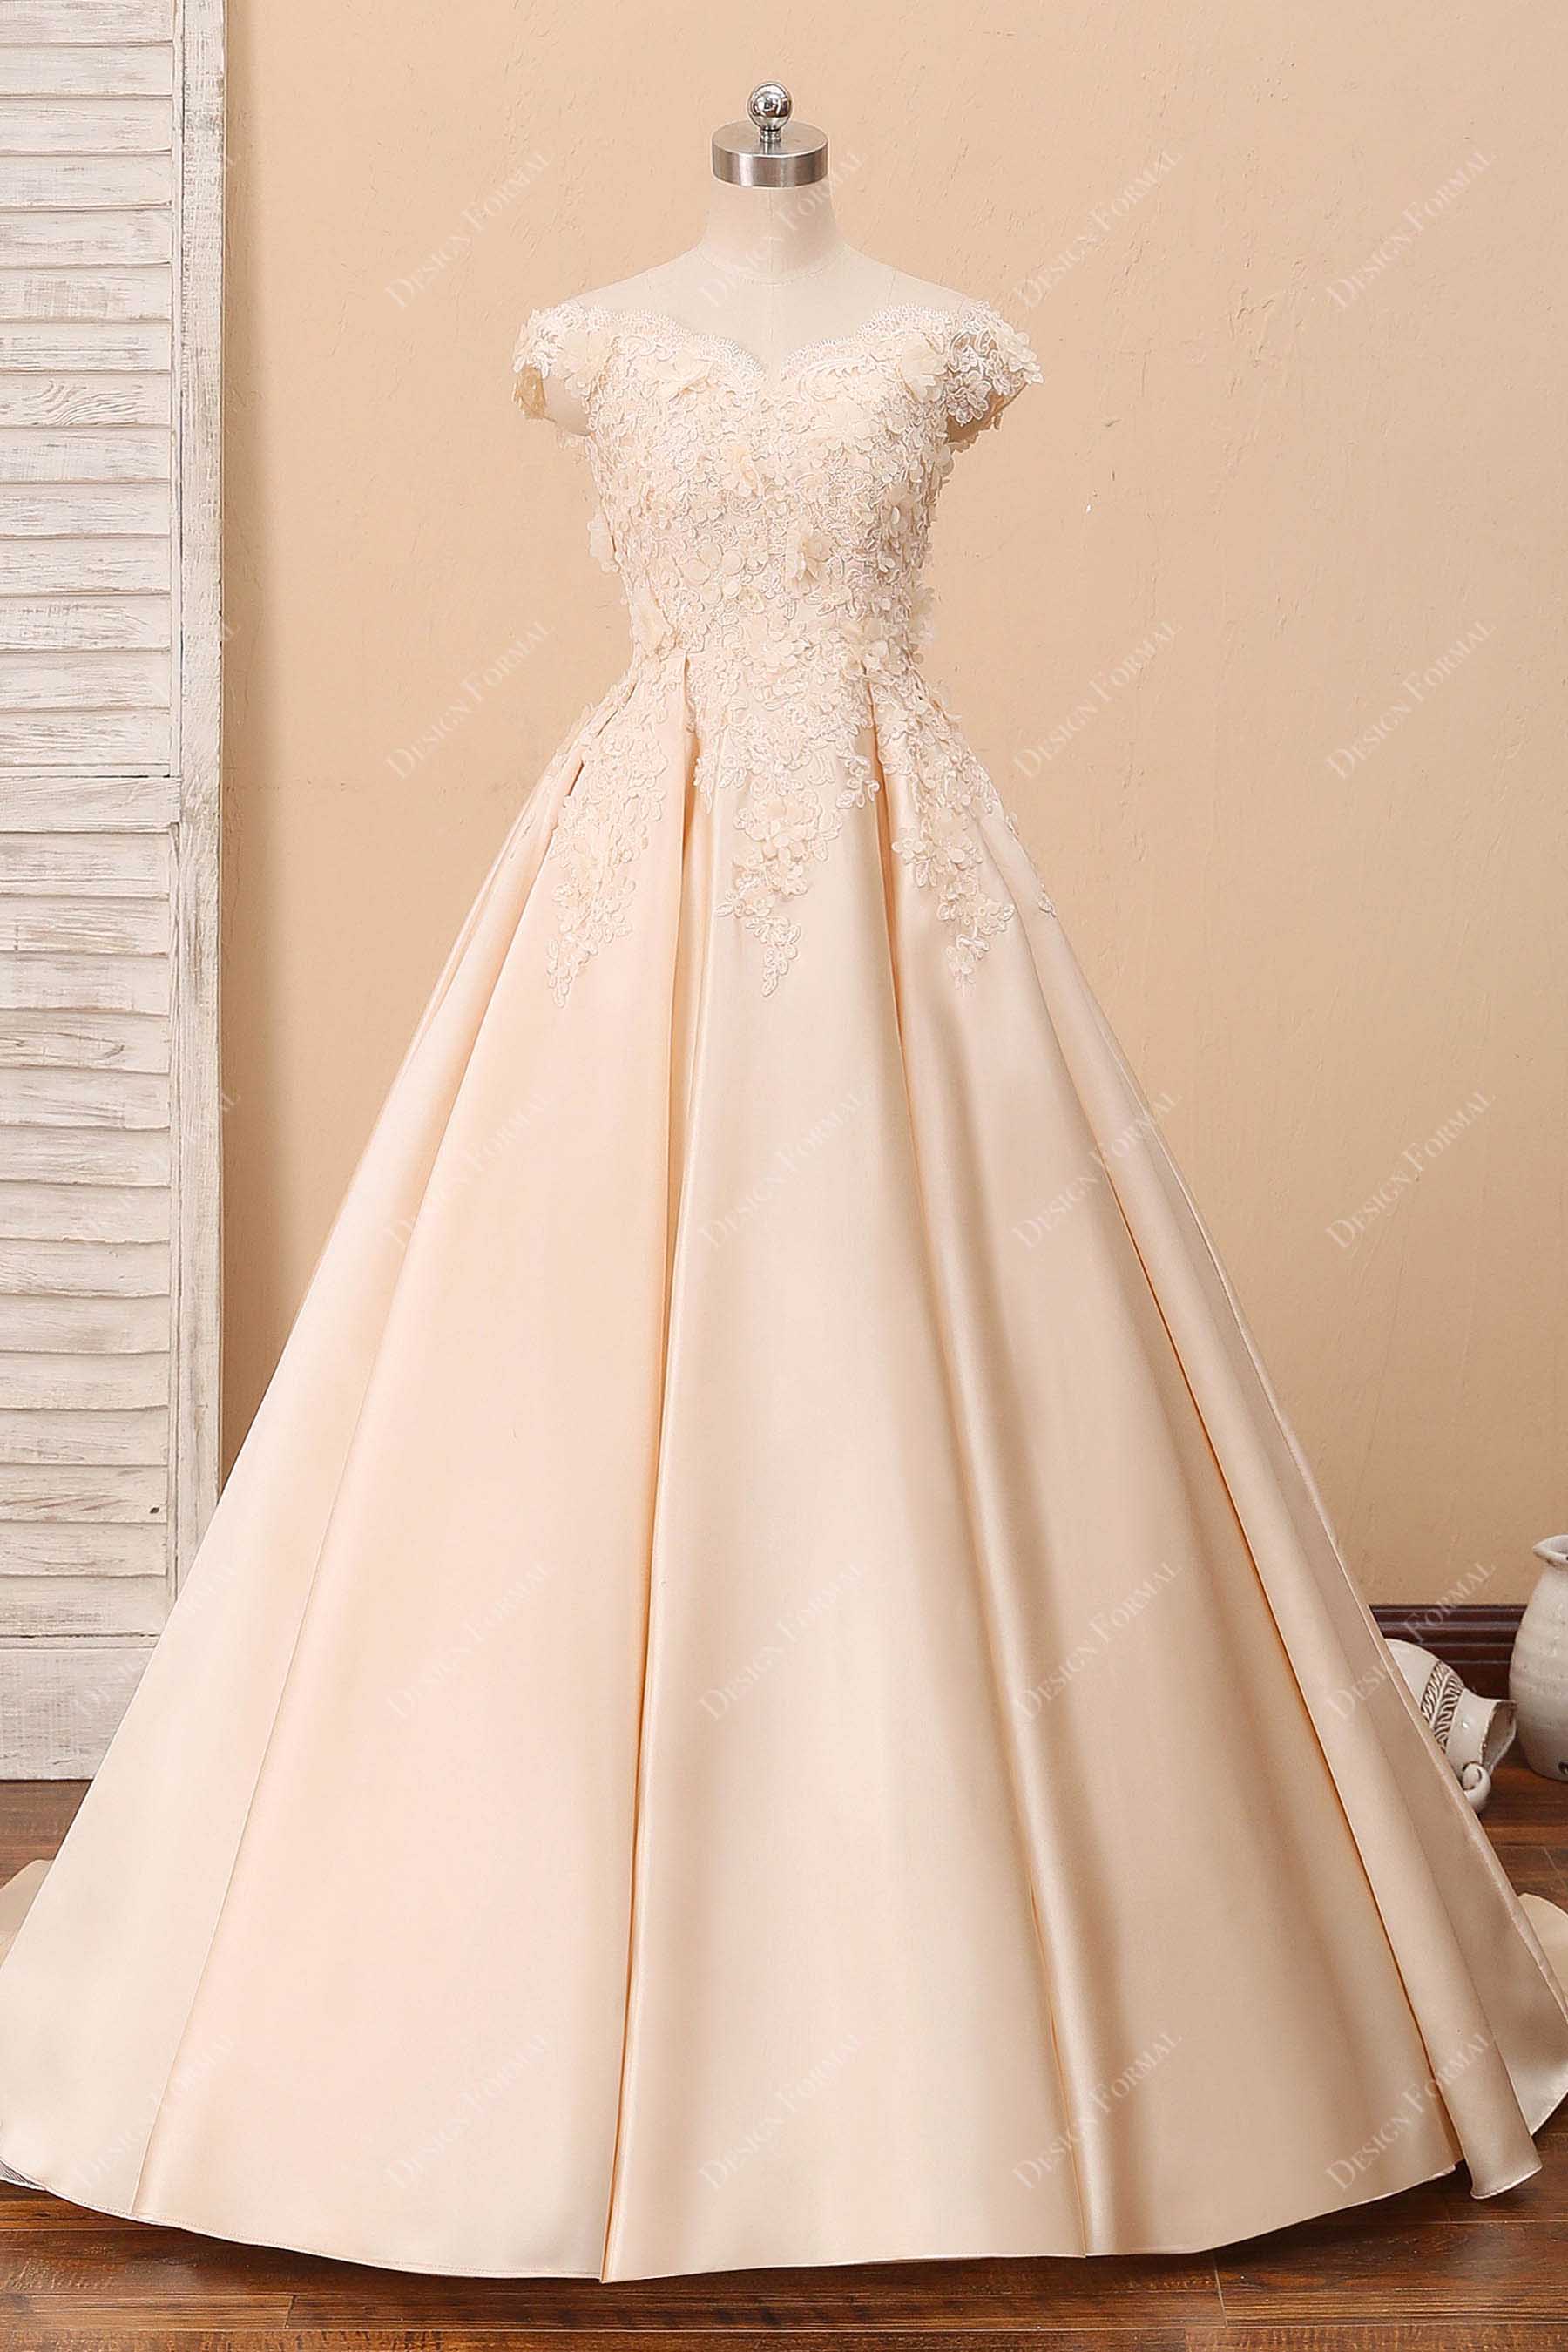 3D Floral Lace Champagne Satin Bridal Prom Ball Gown